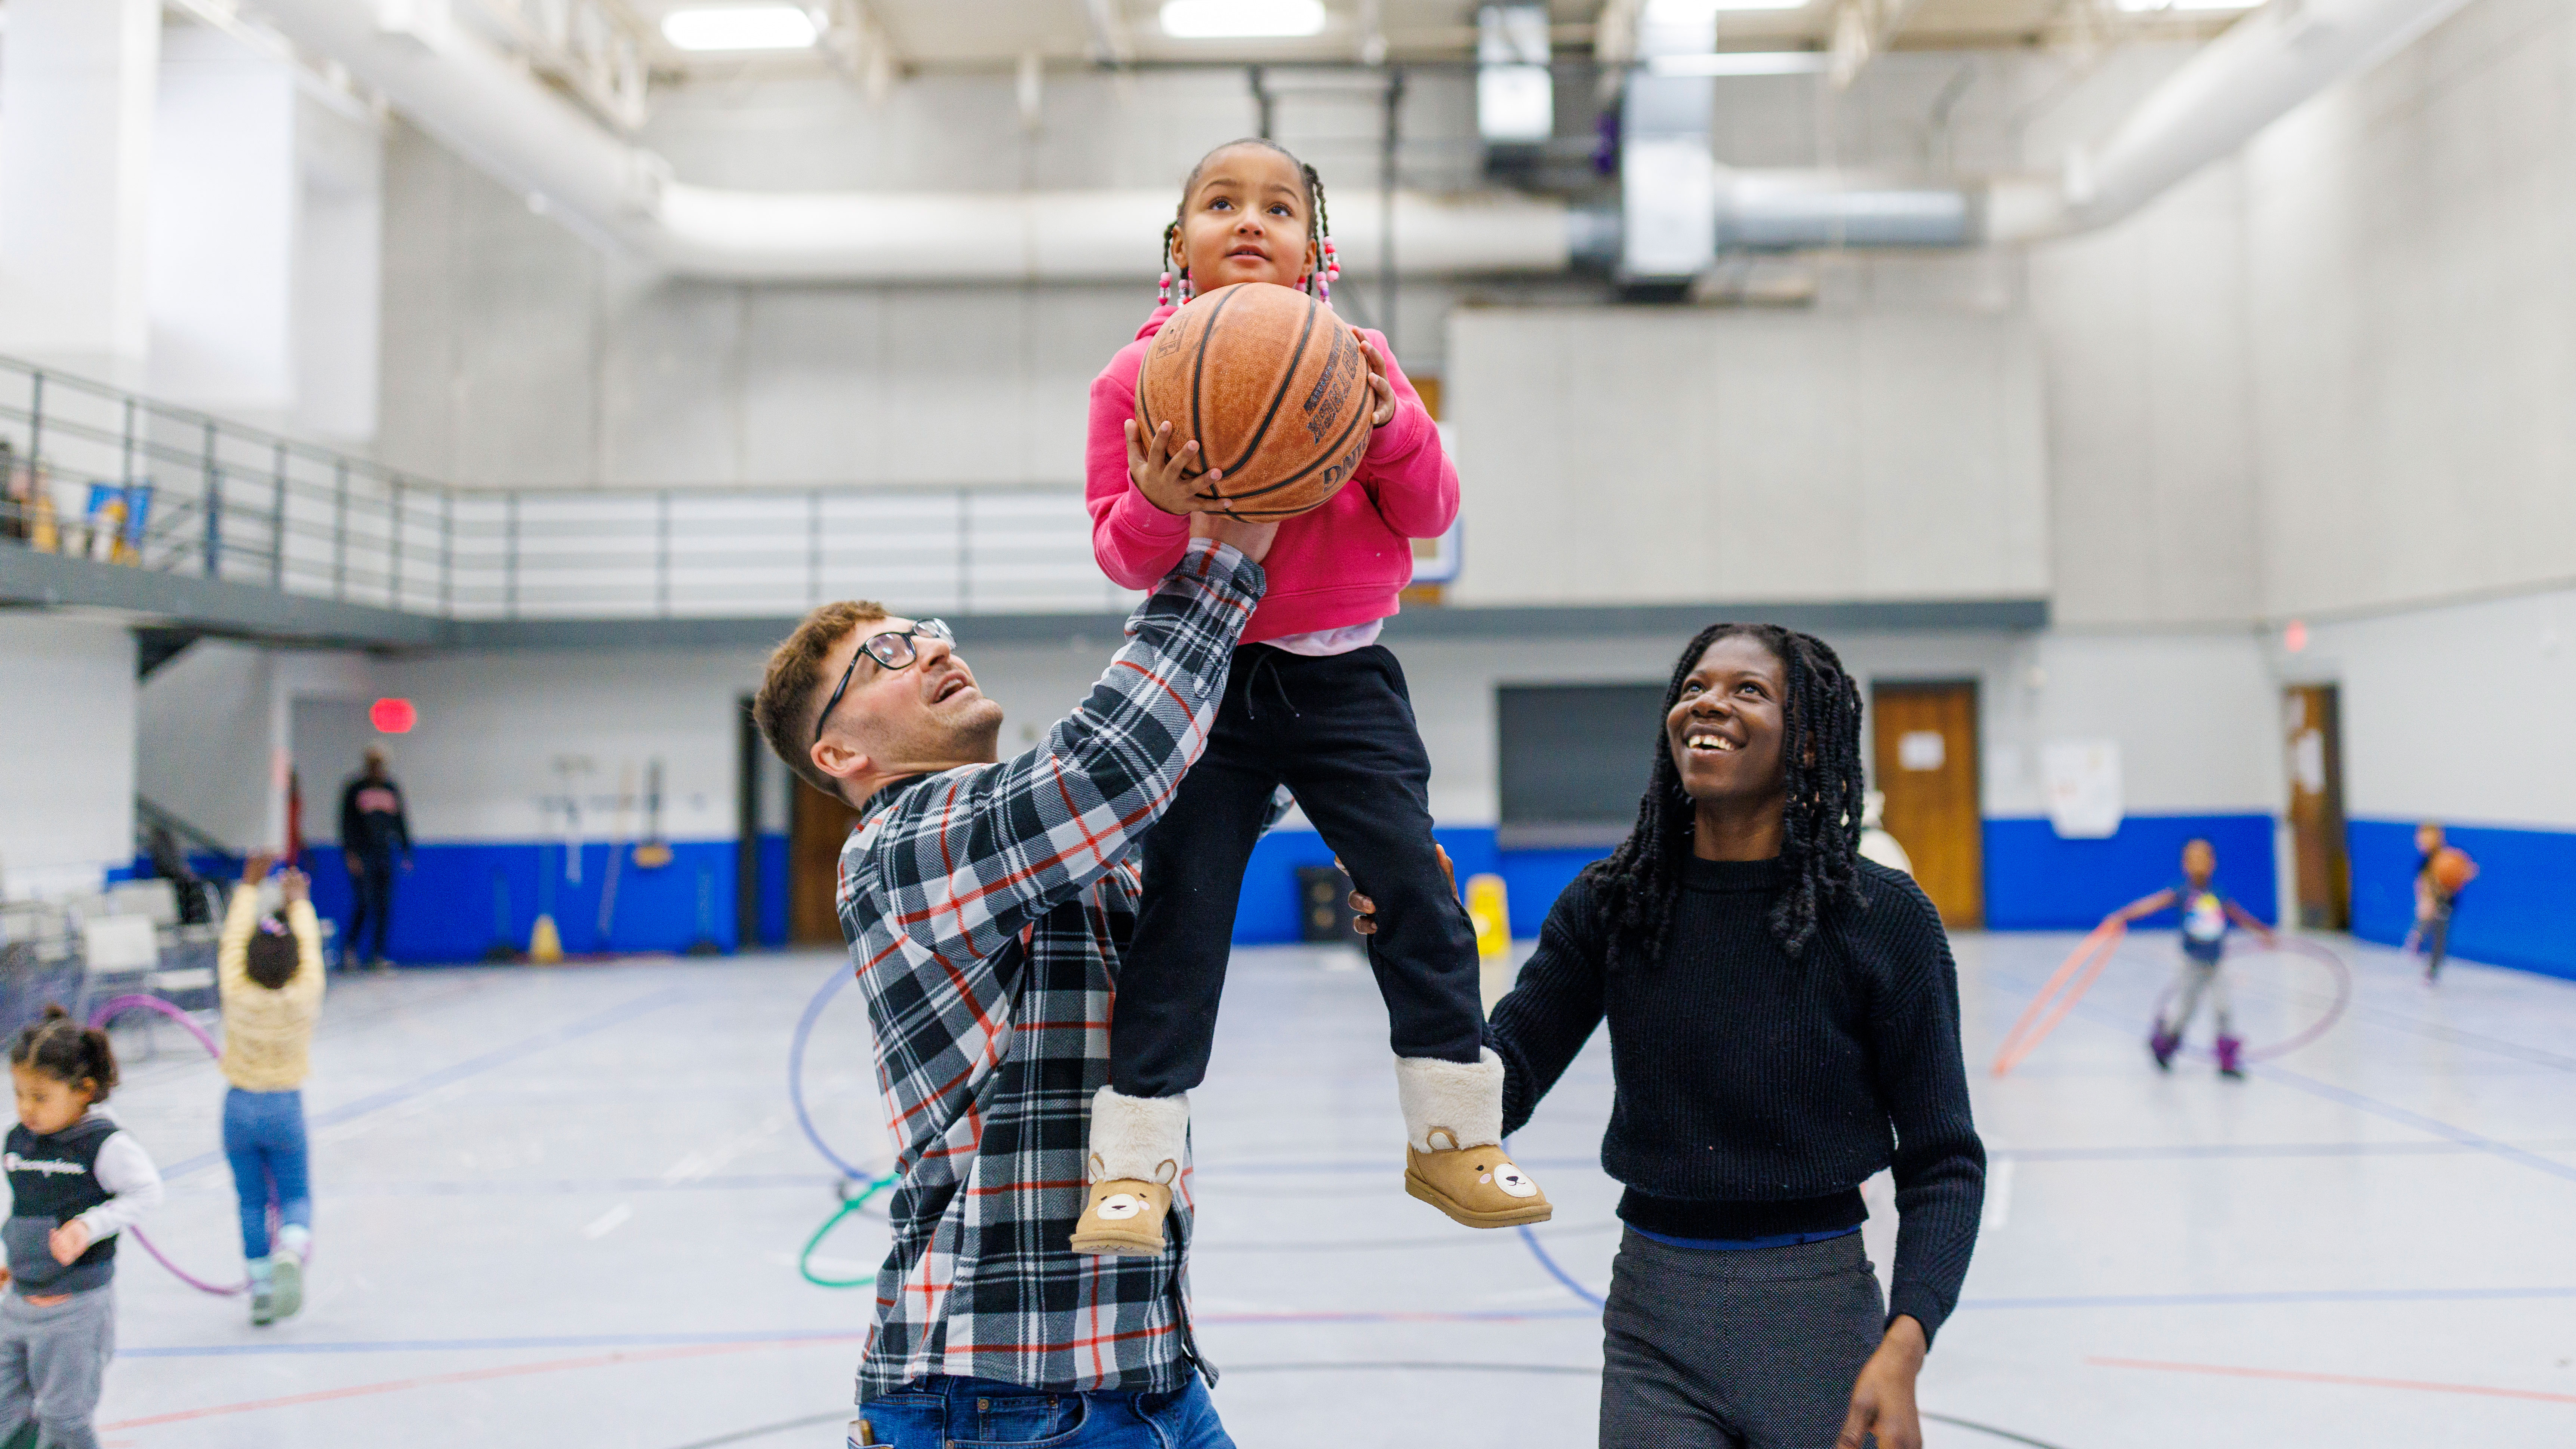 Ben Bentzinger, a senior in criminal justice, and Francisca Lawson Tettevie a graduate student in human sciences, help Journey shoot a basket at the Malone Center.